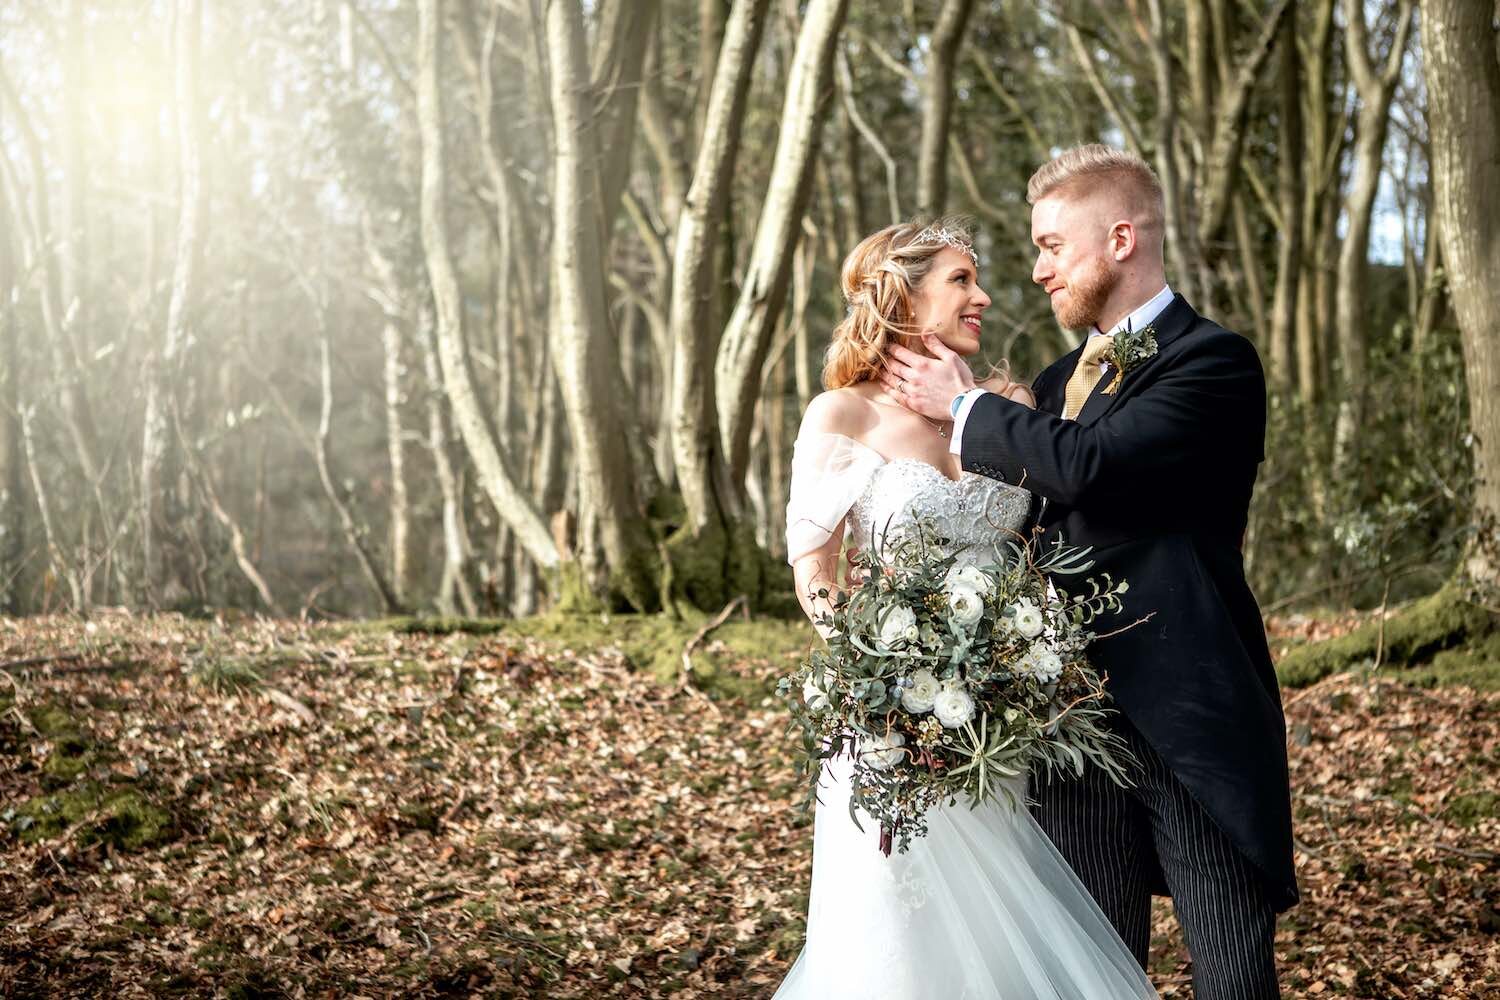 Woodland with bride and groom and bridal flowers posing in winter